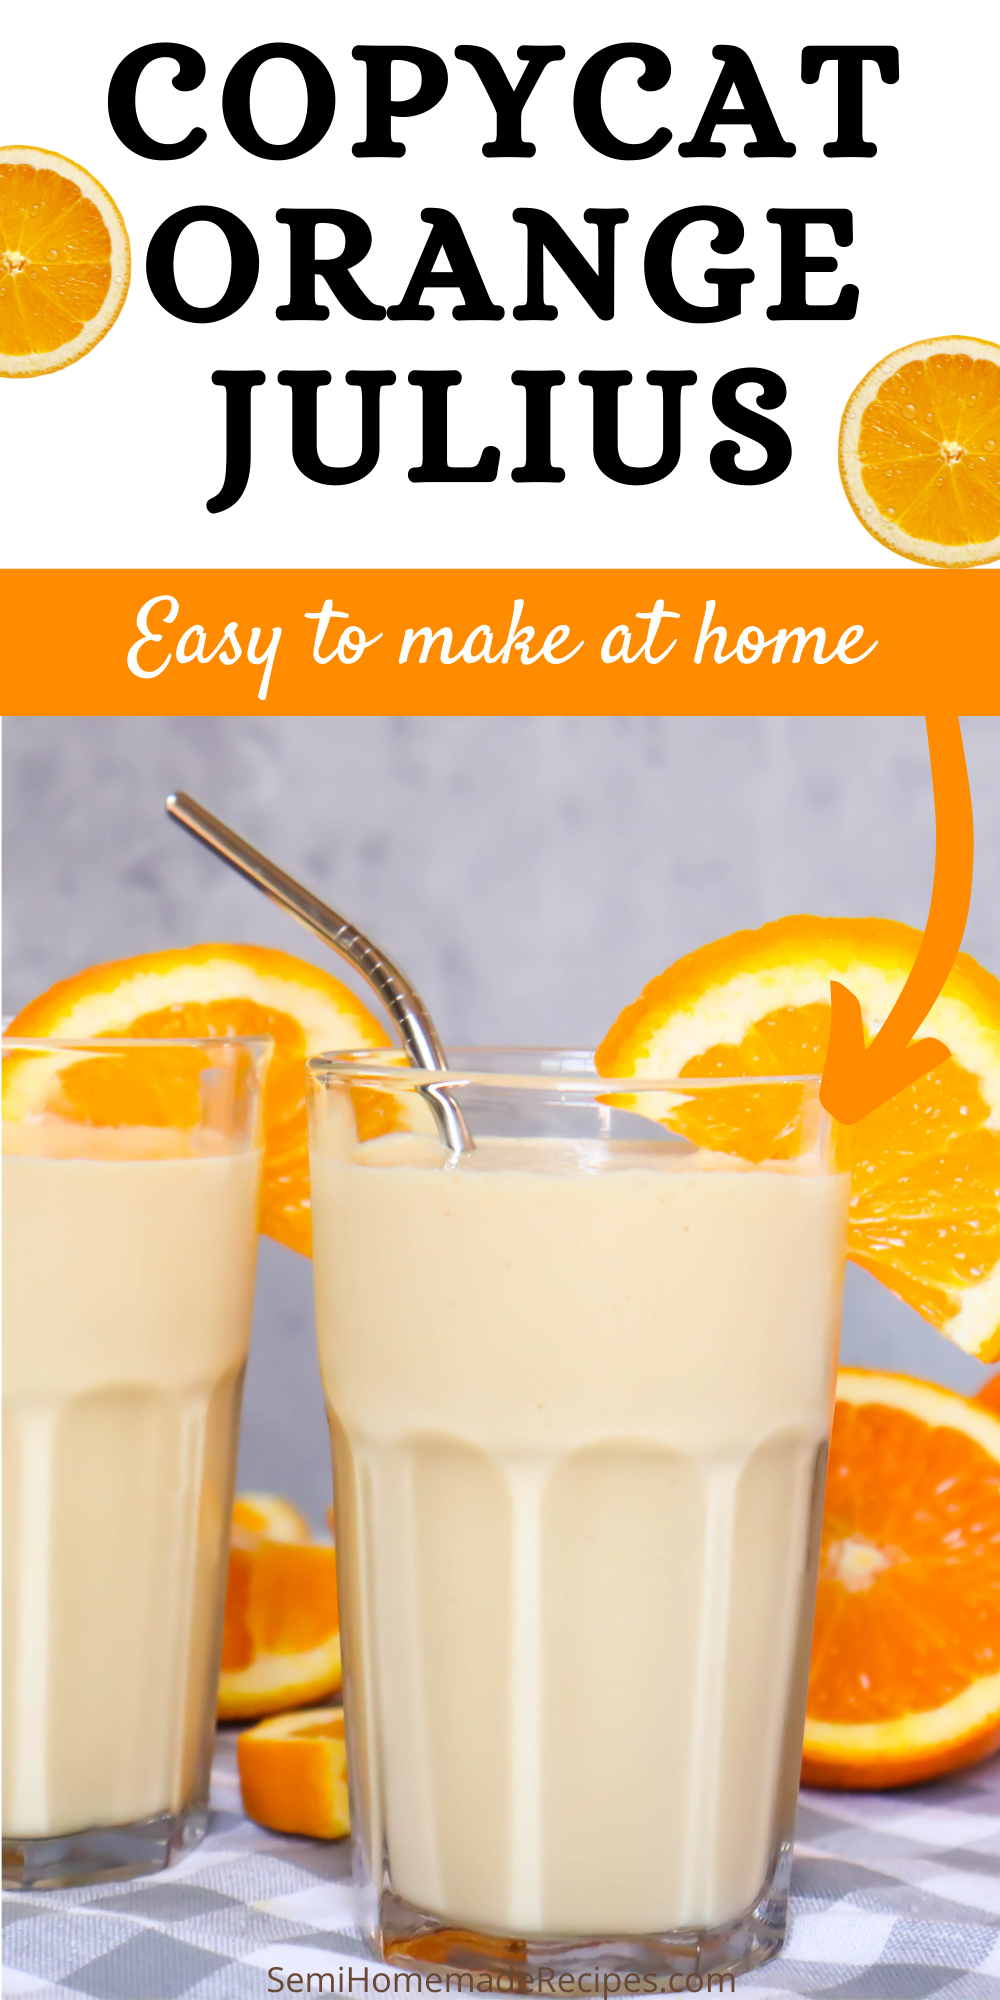 Have you ever had an Orange Julius? You've got to try this easy homemade Copycat Orange Julius recipe!